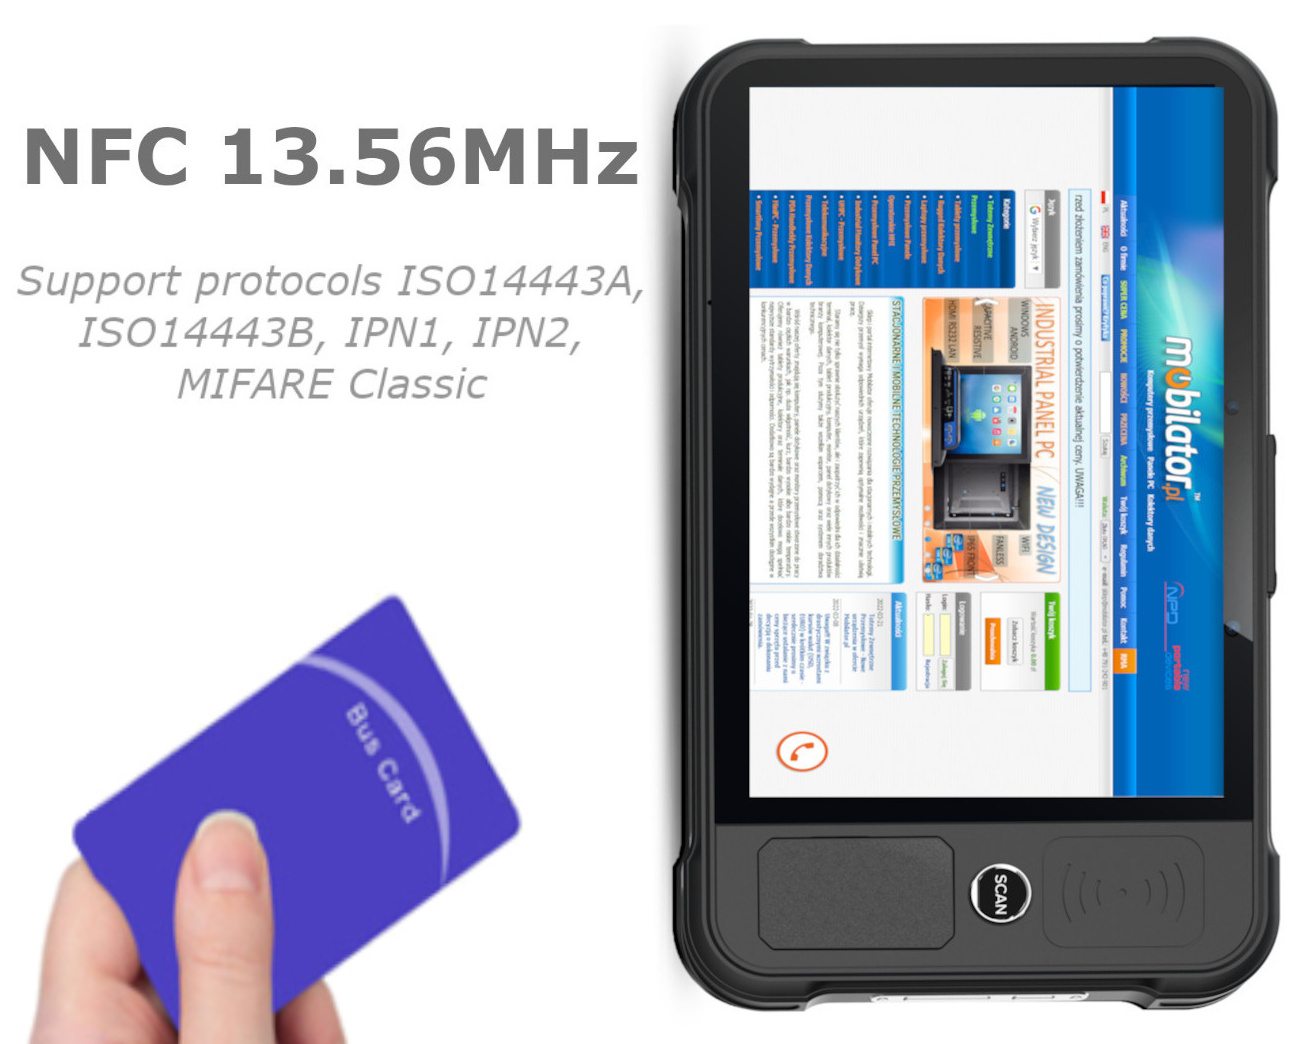 P80 PE tablet can connect with NFC devices